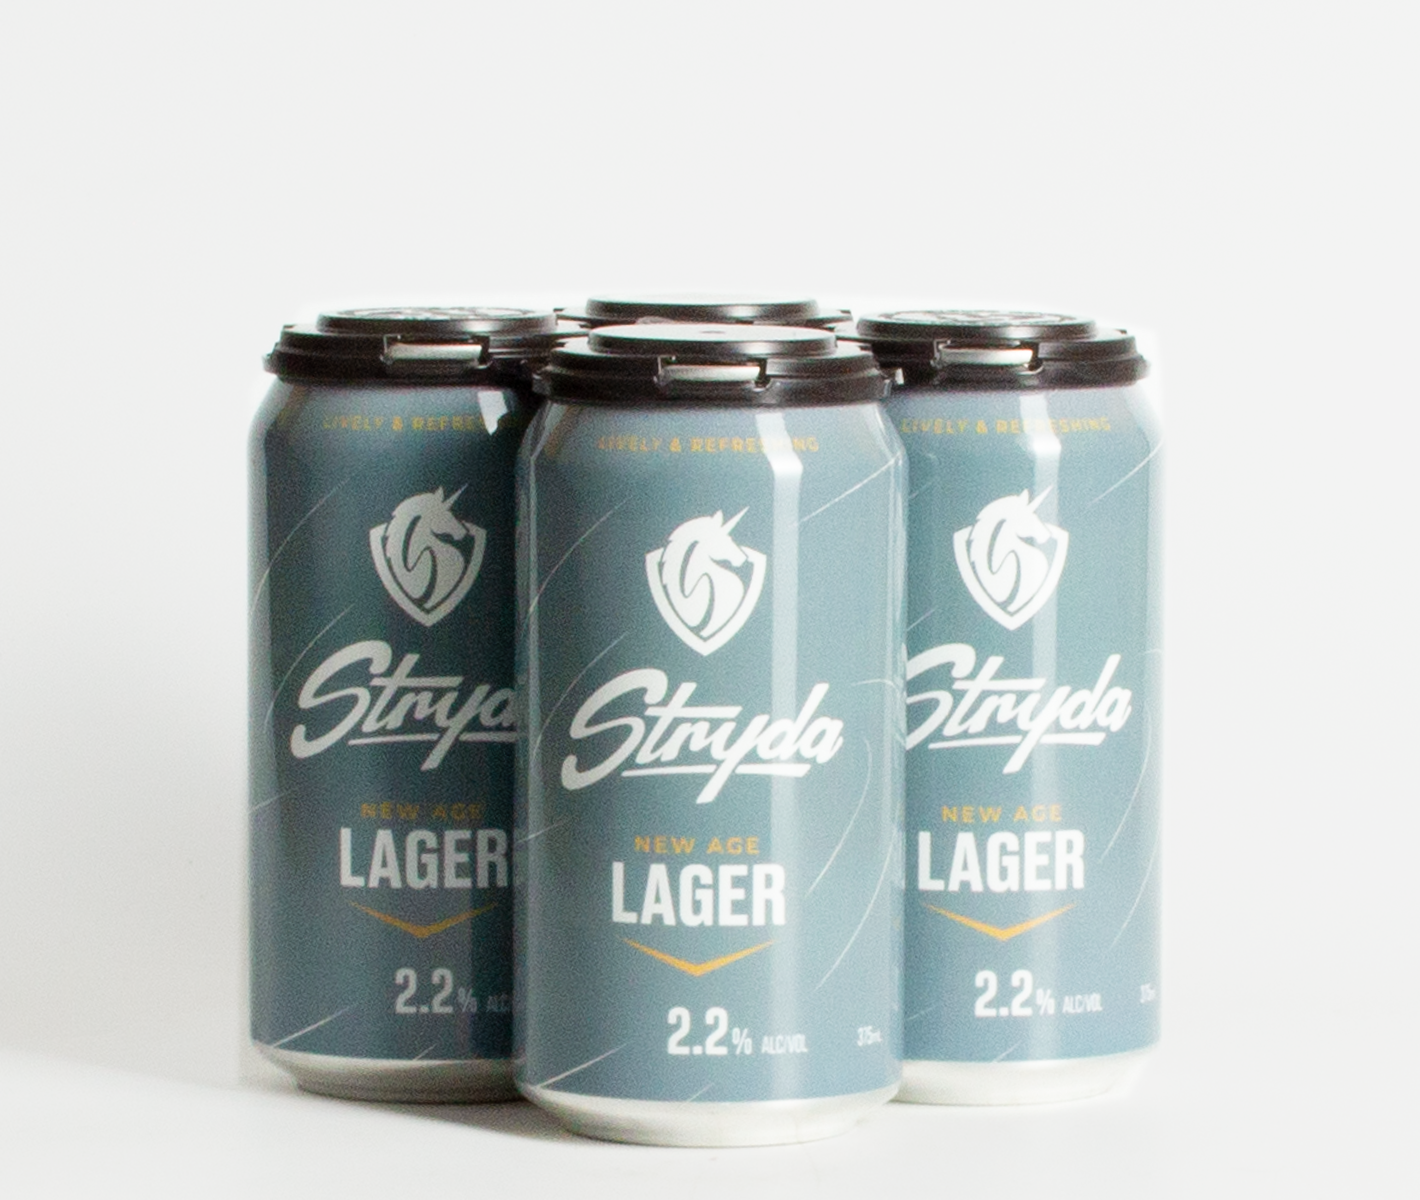 New Age Lager 4 Pack (375ml)